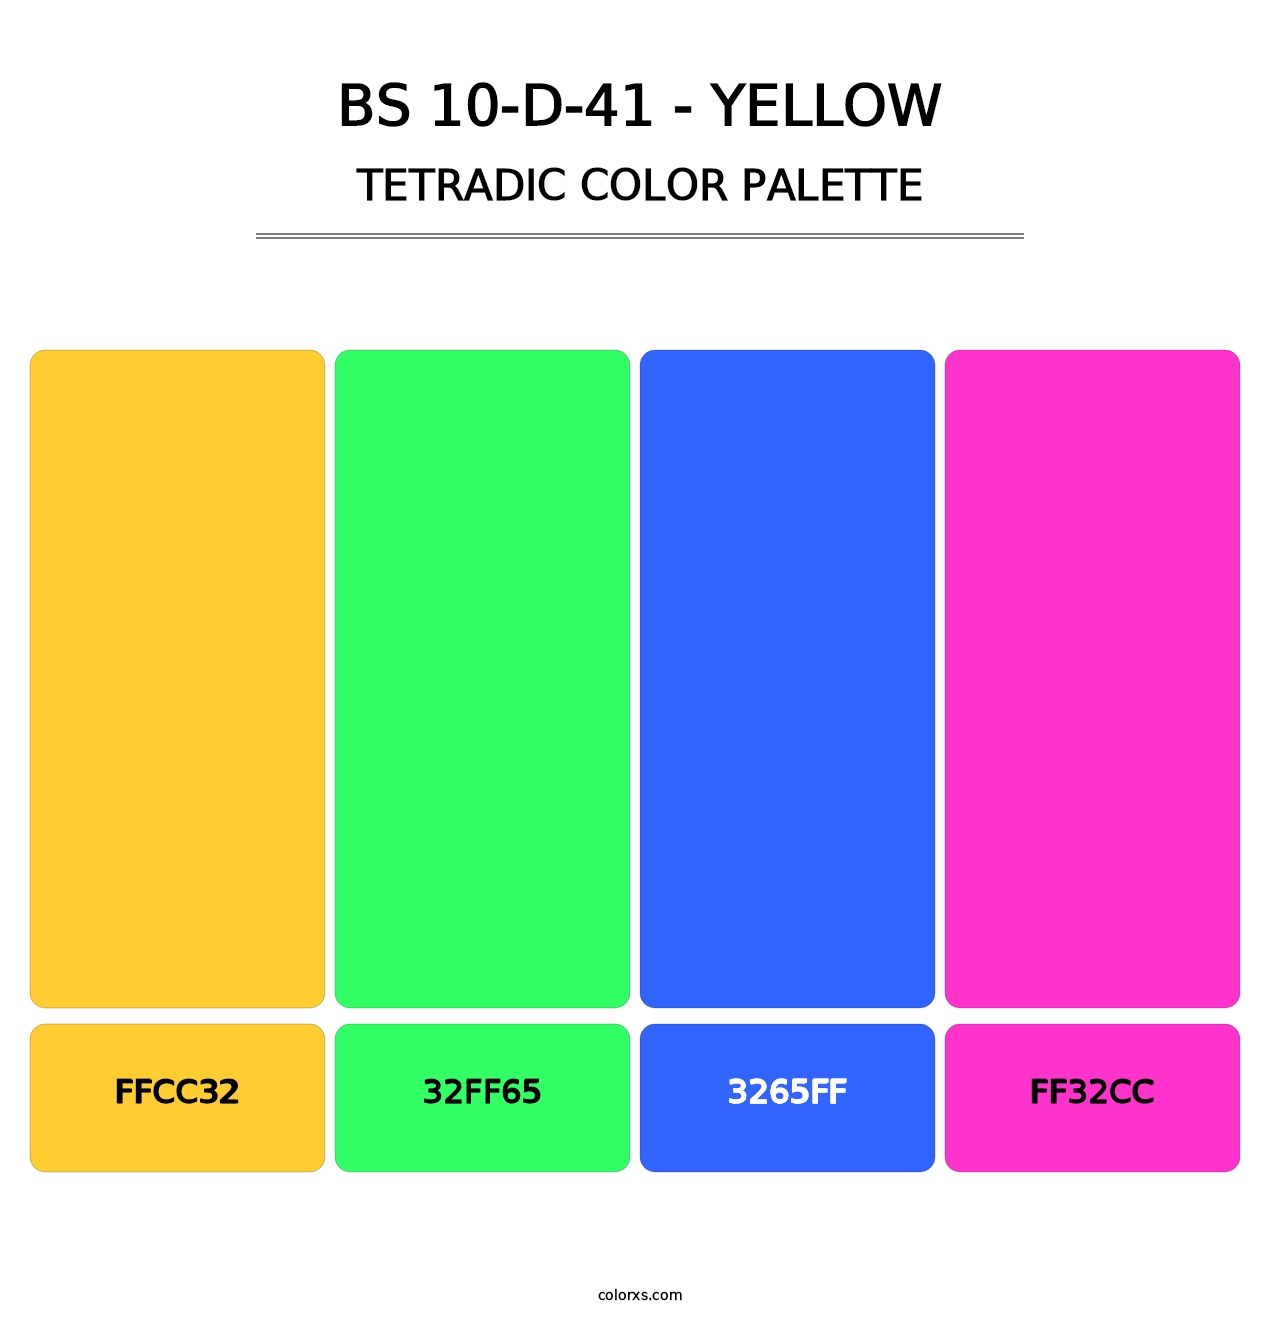 BS 10-D-41 - Yellow - Tetradic Color Palette